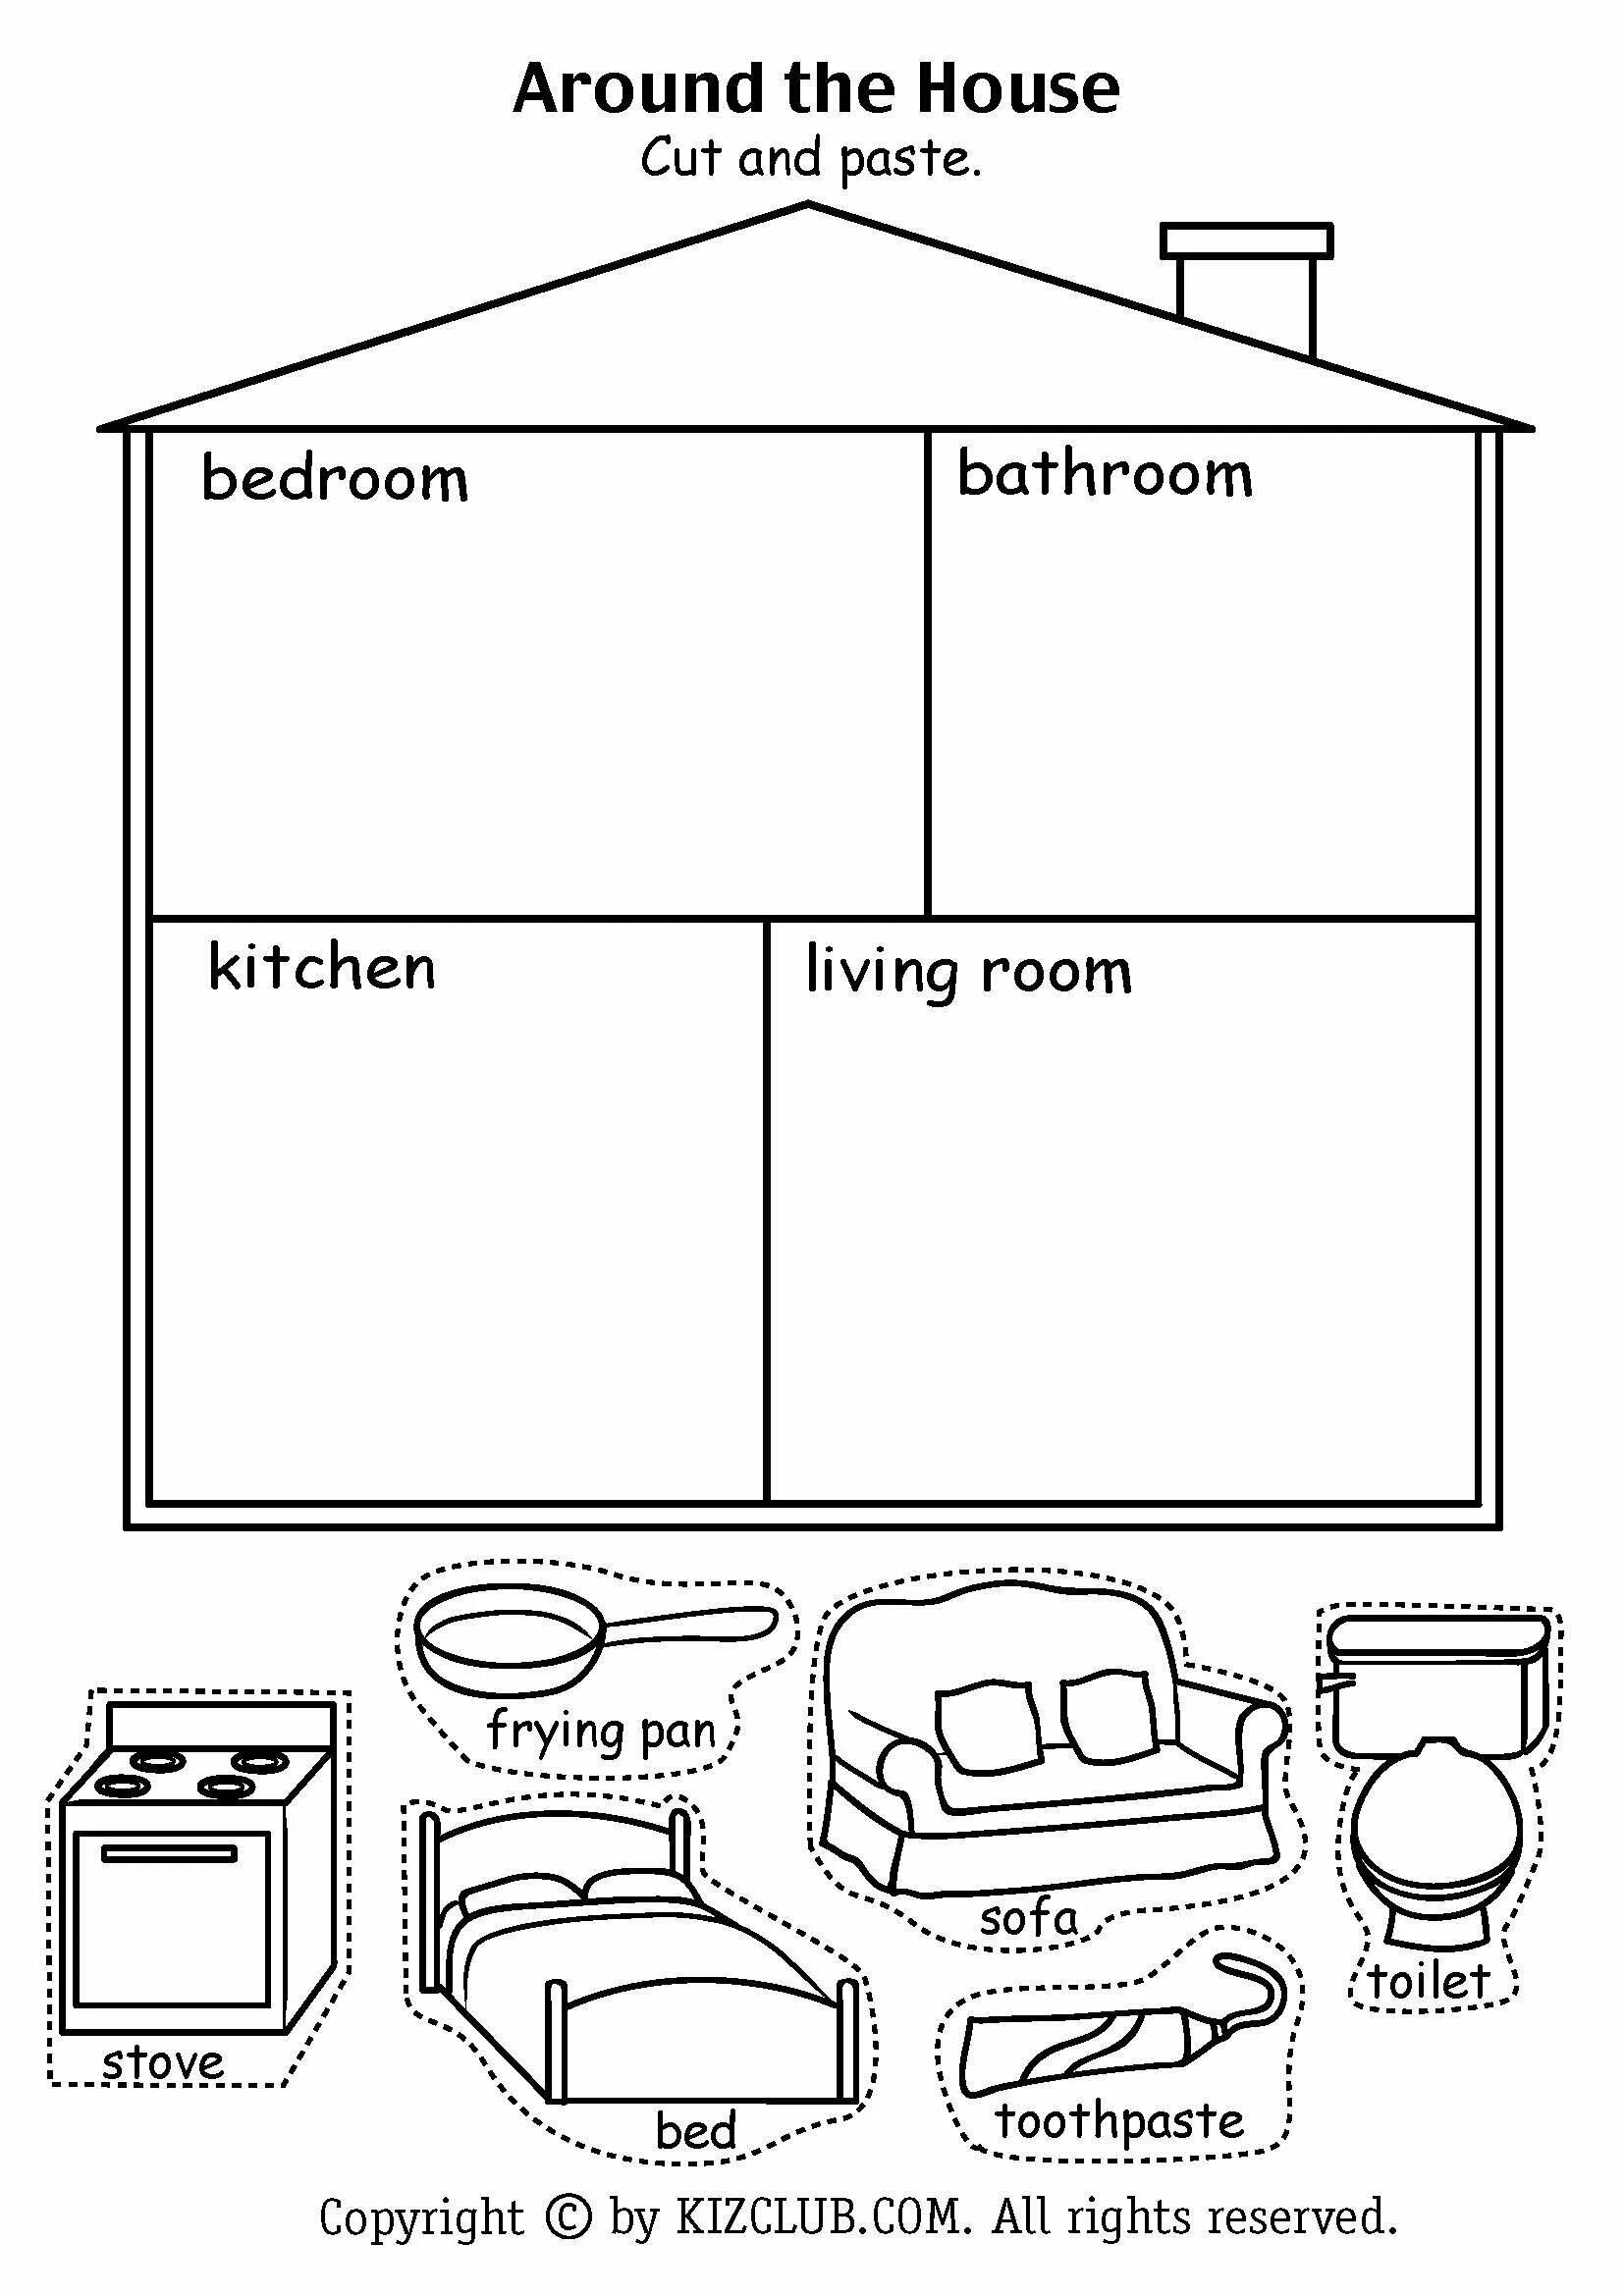 Английский язык Parts of the House Kindergarten. Комнаты Worksheets for Kids. Rooms in the House задания. Задания по английскому мой дом. House 2 класс английский язык